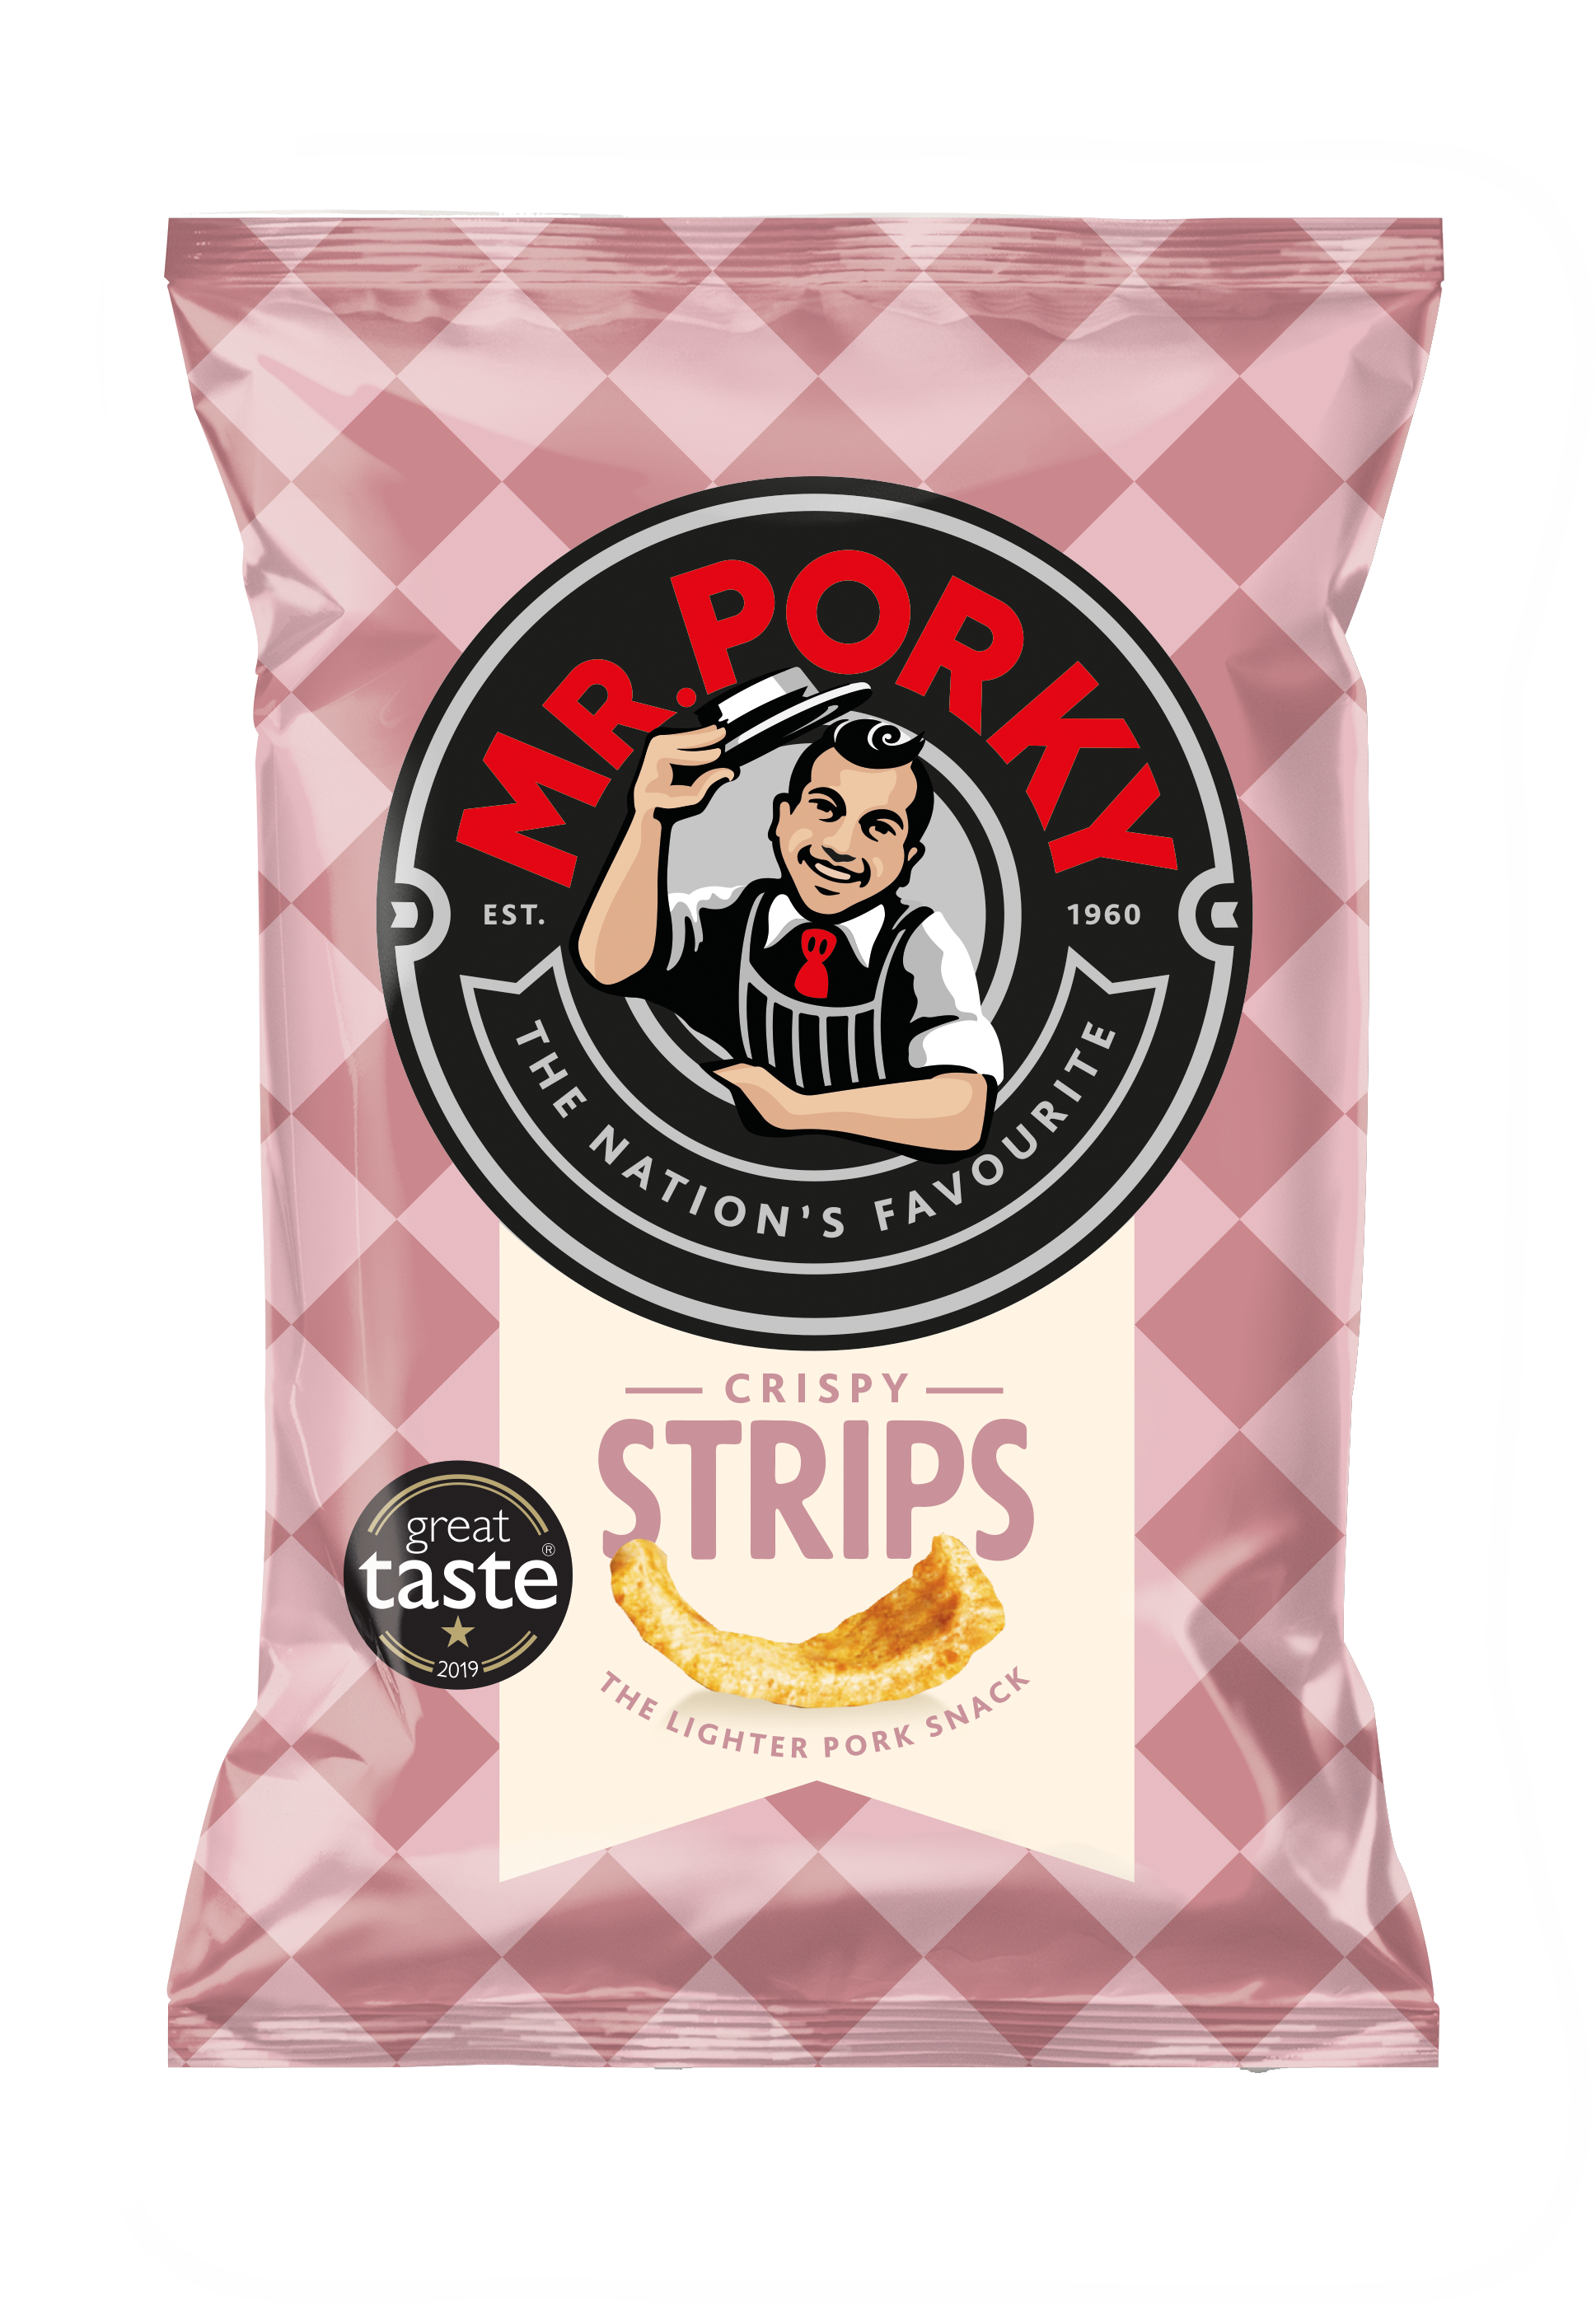 Mr. Porky packs in sales with new Crispy Strips campaign